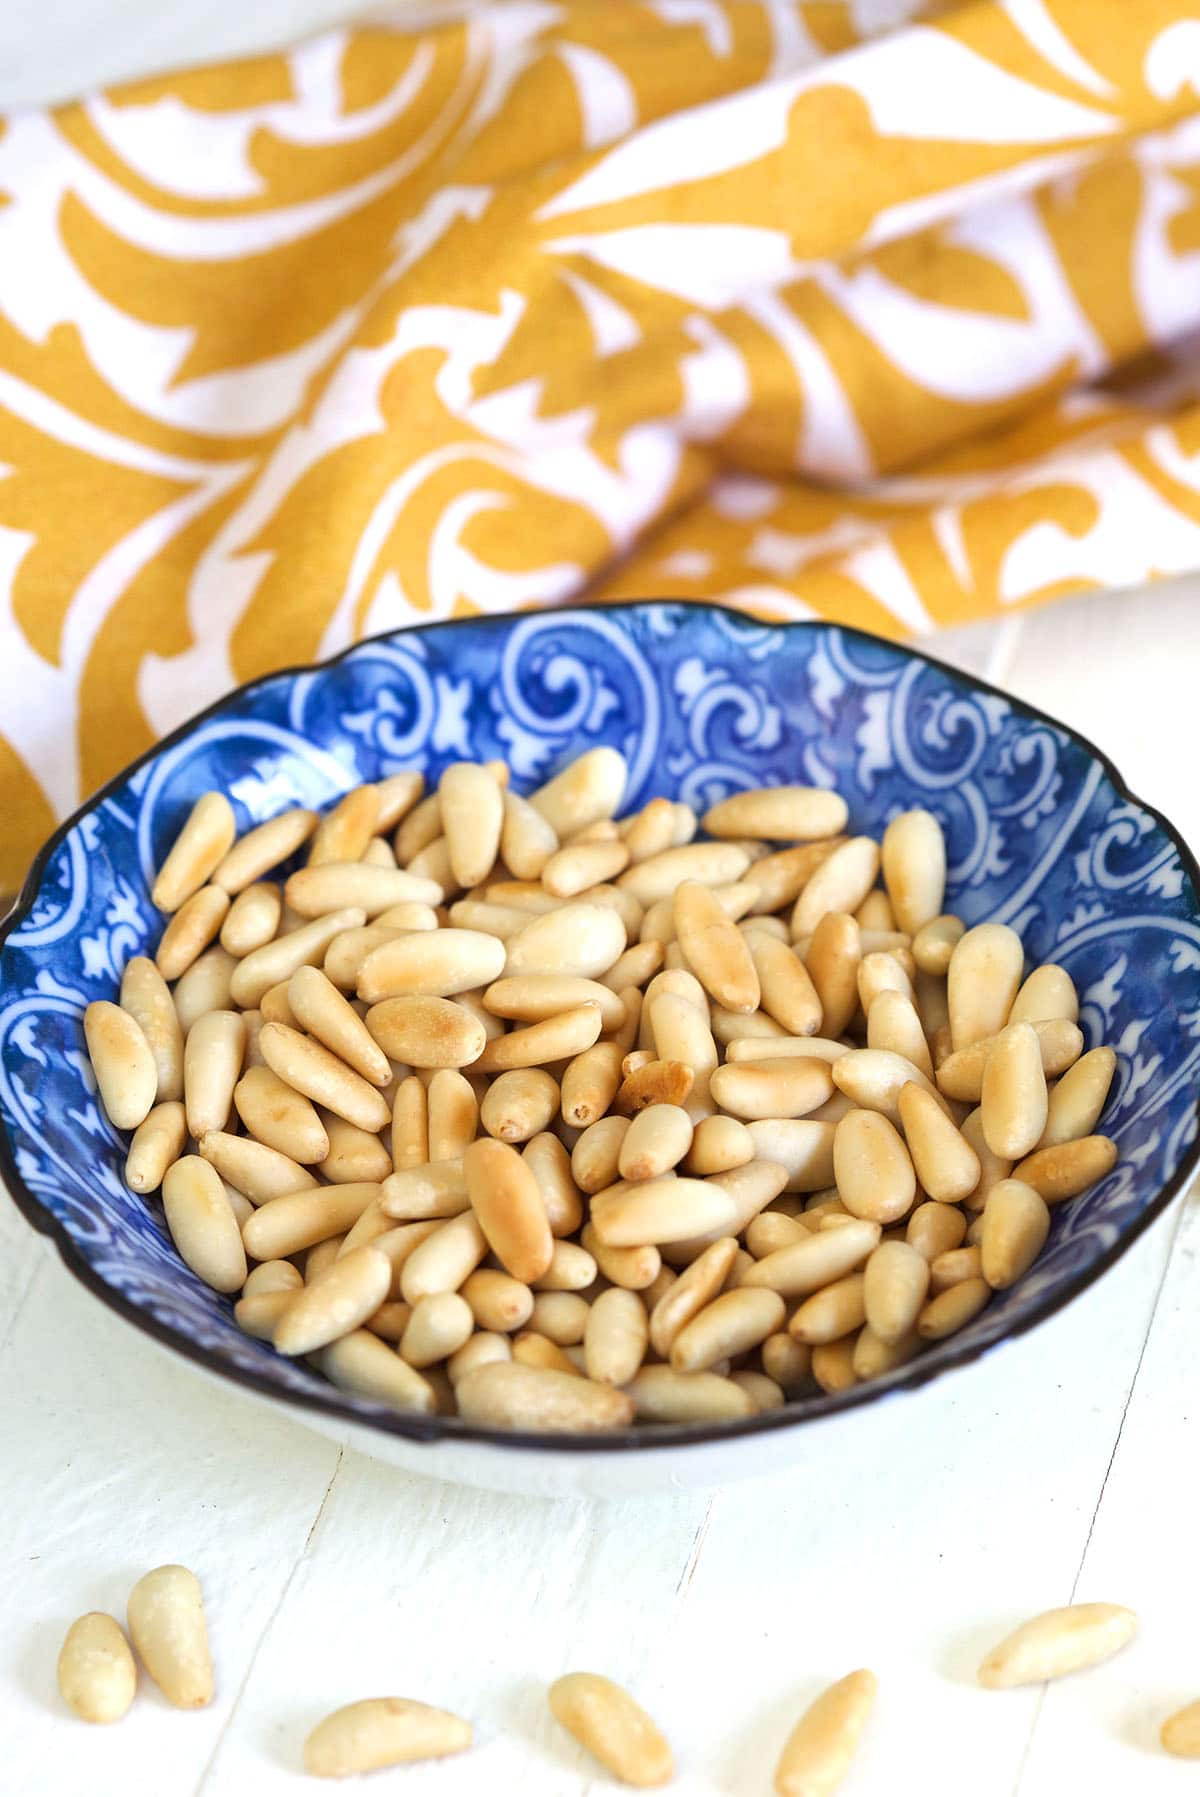 Toasted pine nuts in a blue bowl are placed next to an orange and white cloth. 